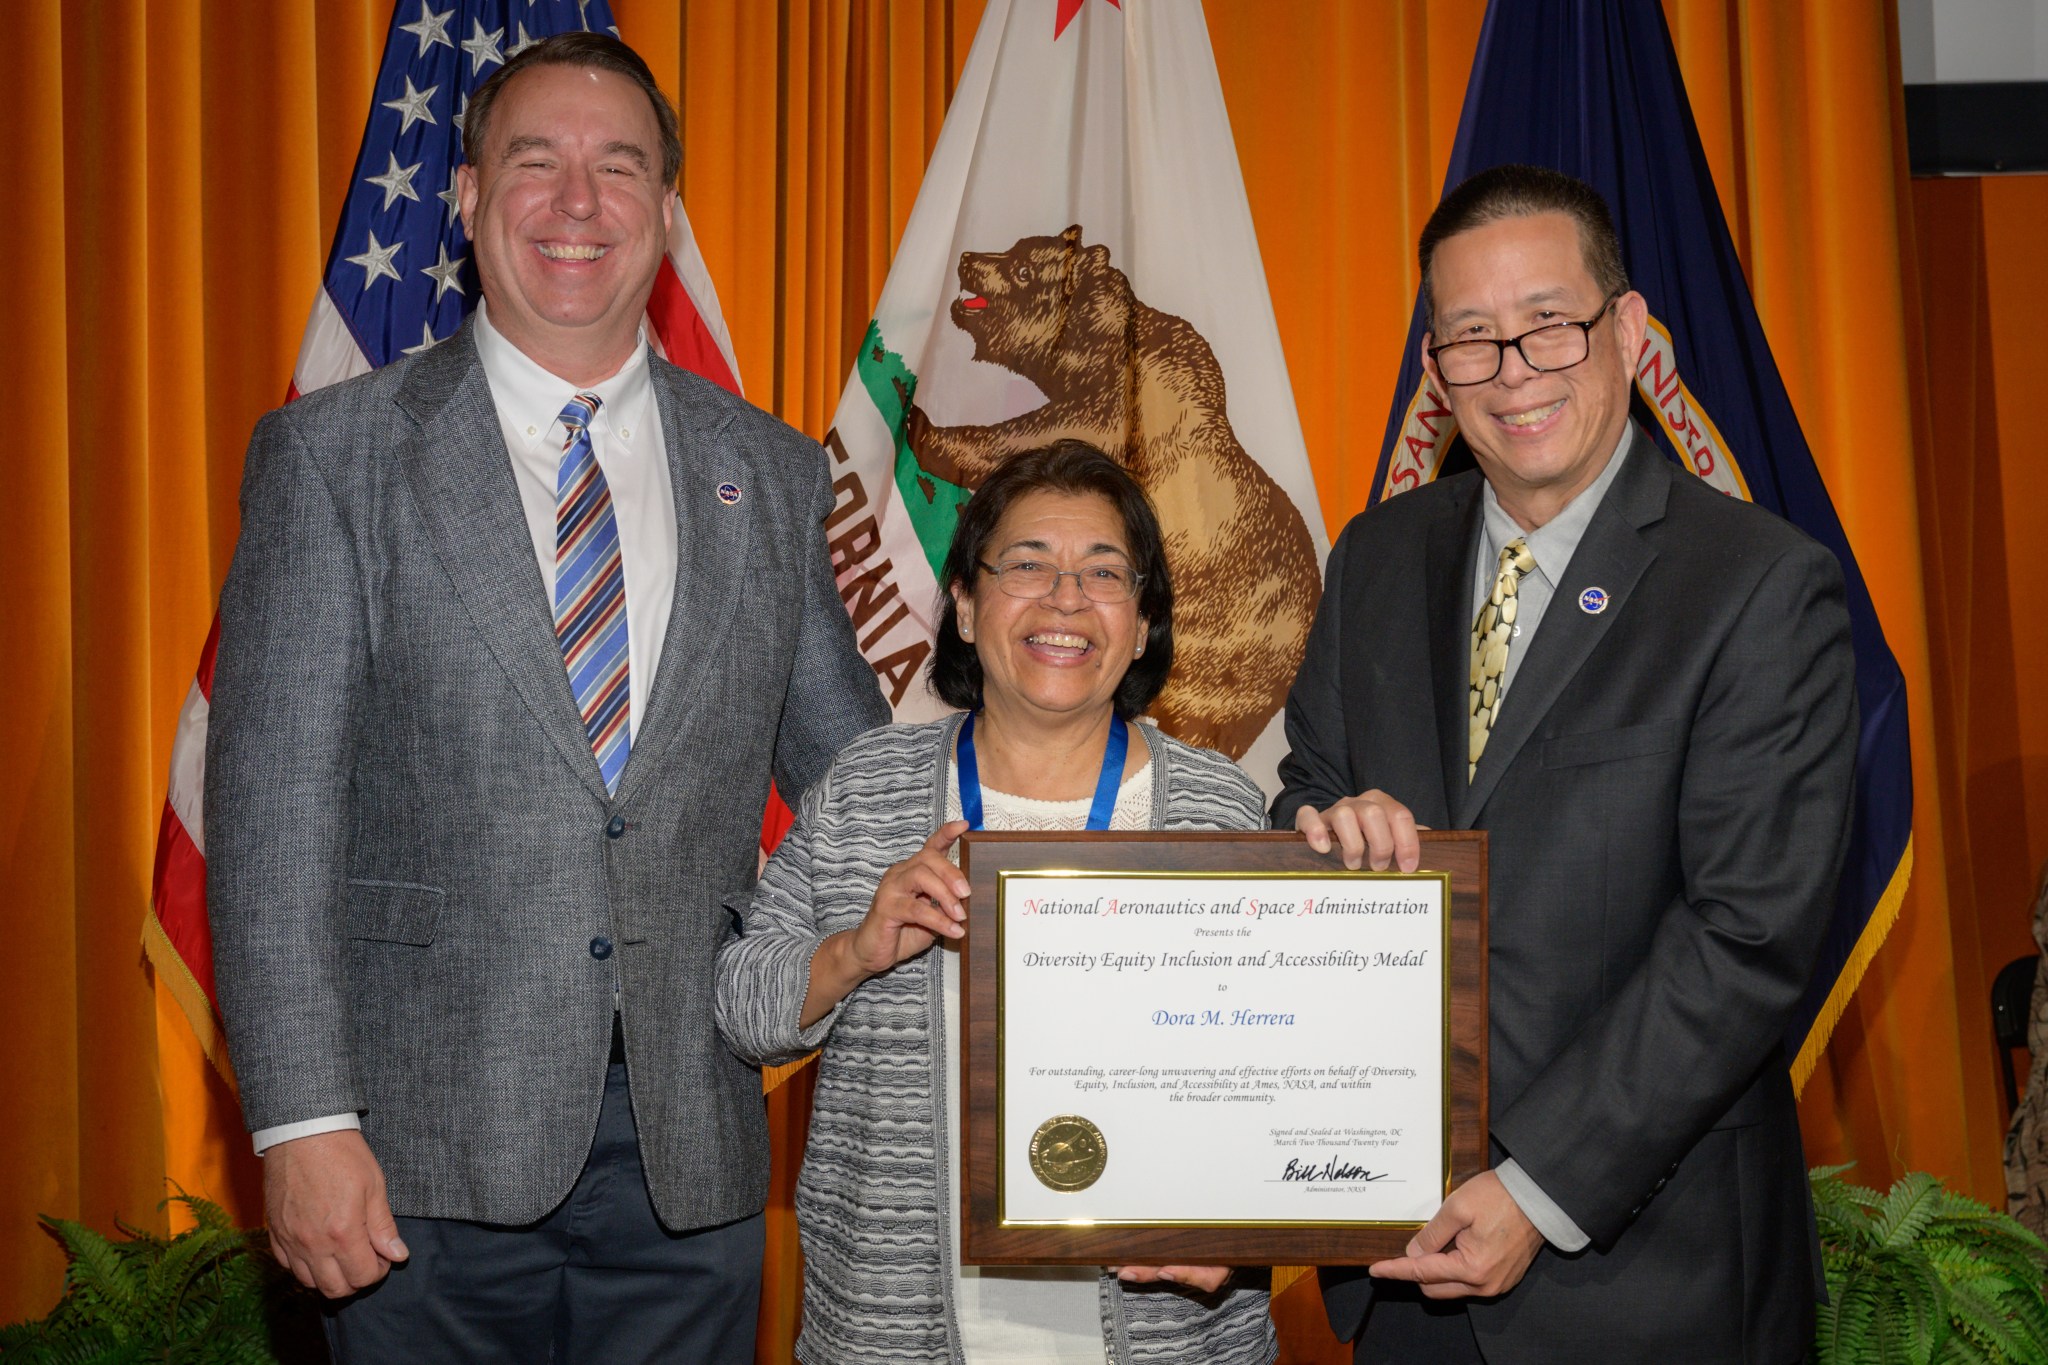 2023 Diversity, Equity, Inclusion and Accessibility Medal presented to Dora Herrera, center, by Center Director Eugene Tu, right, and Deputy Center Director David Korsmeyer, left, in the N201 Auditorium